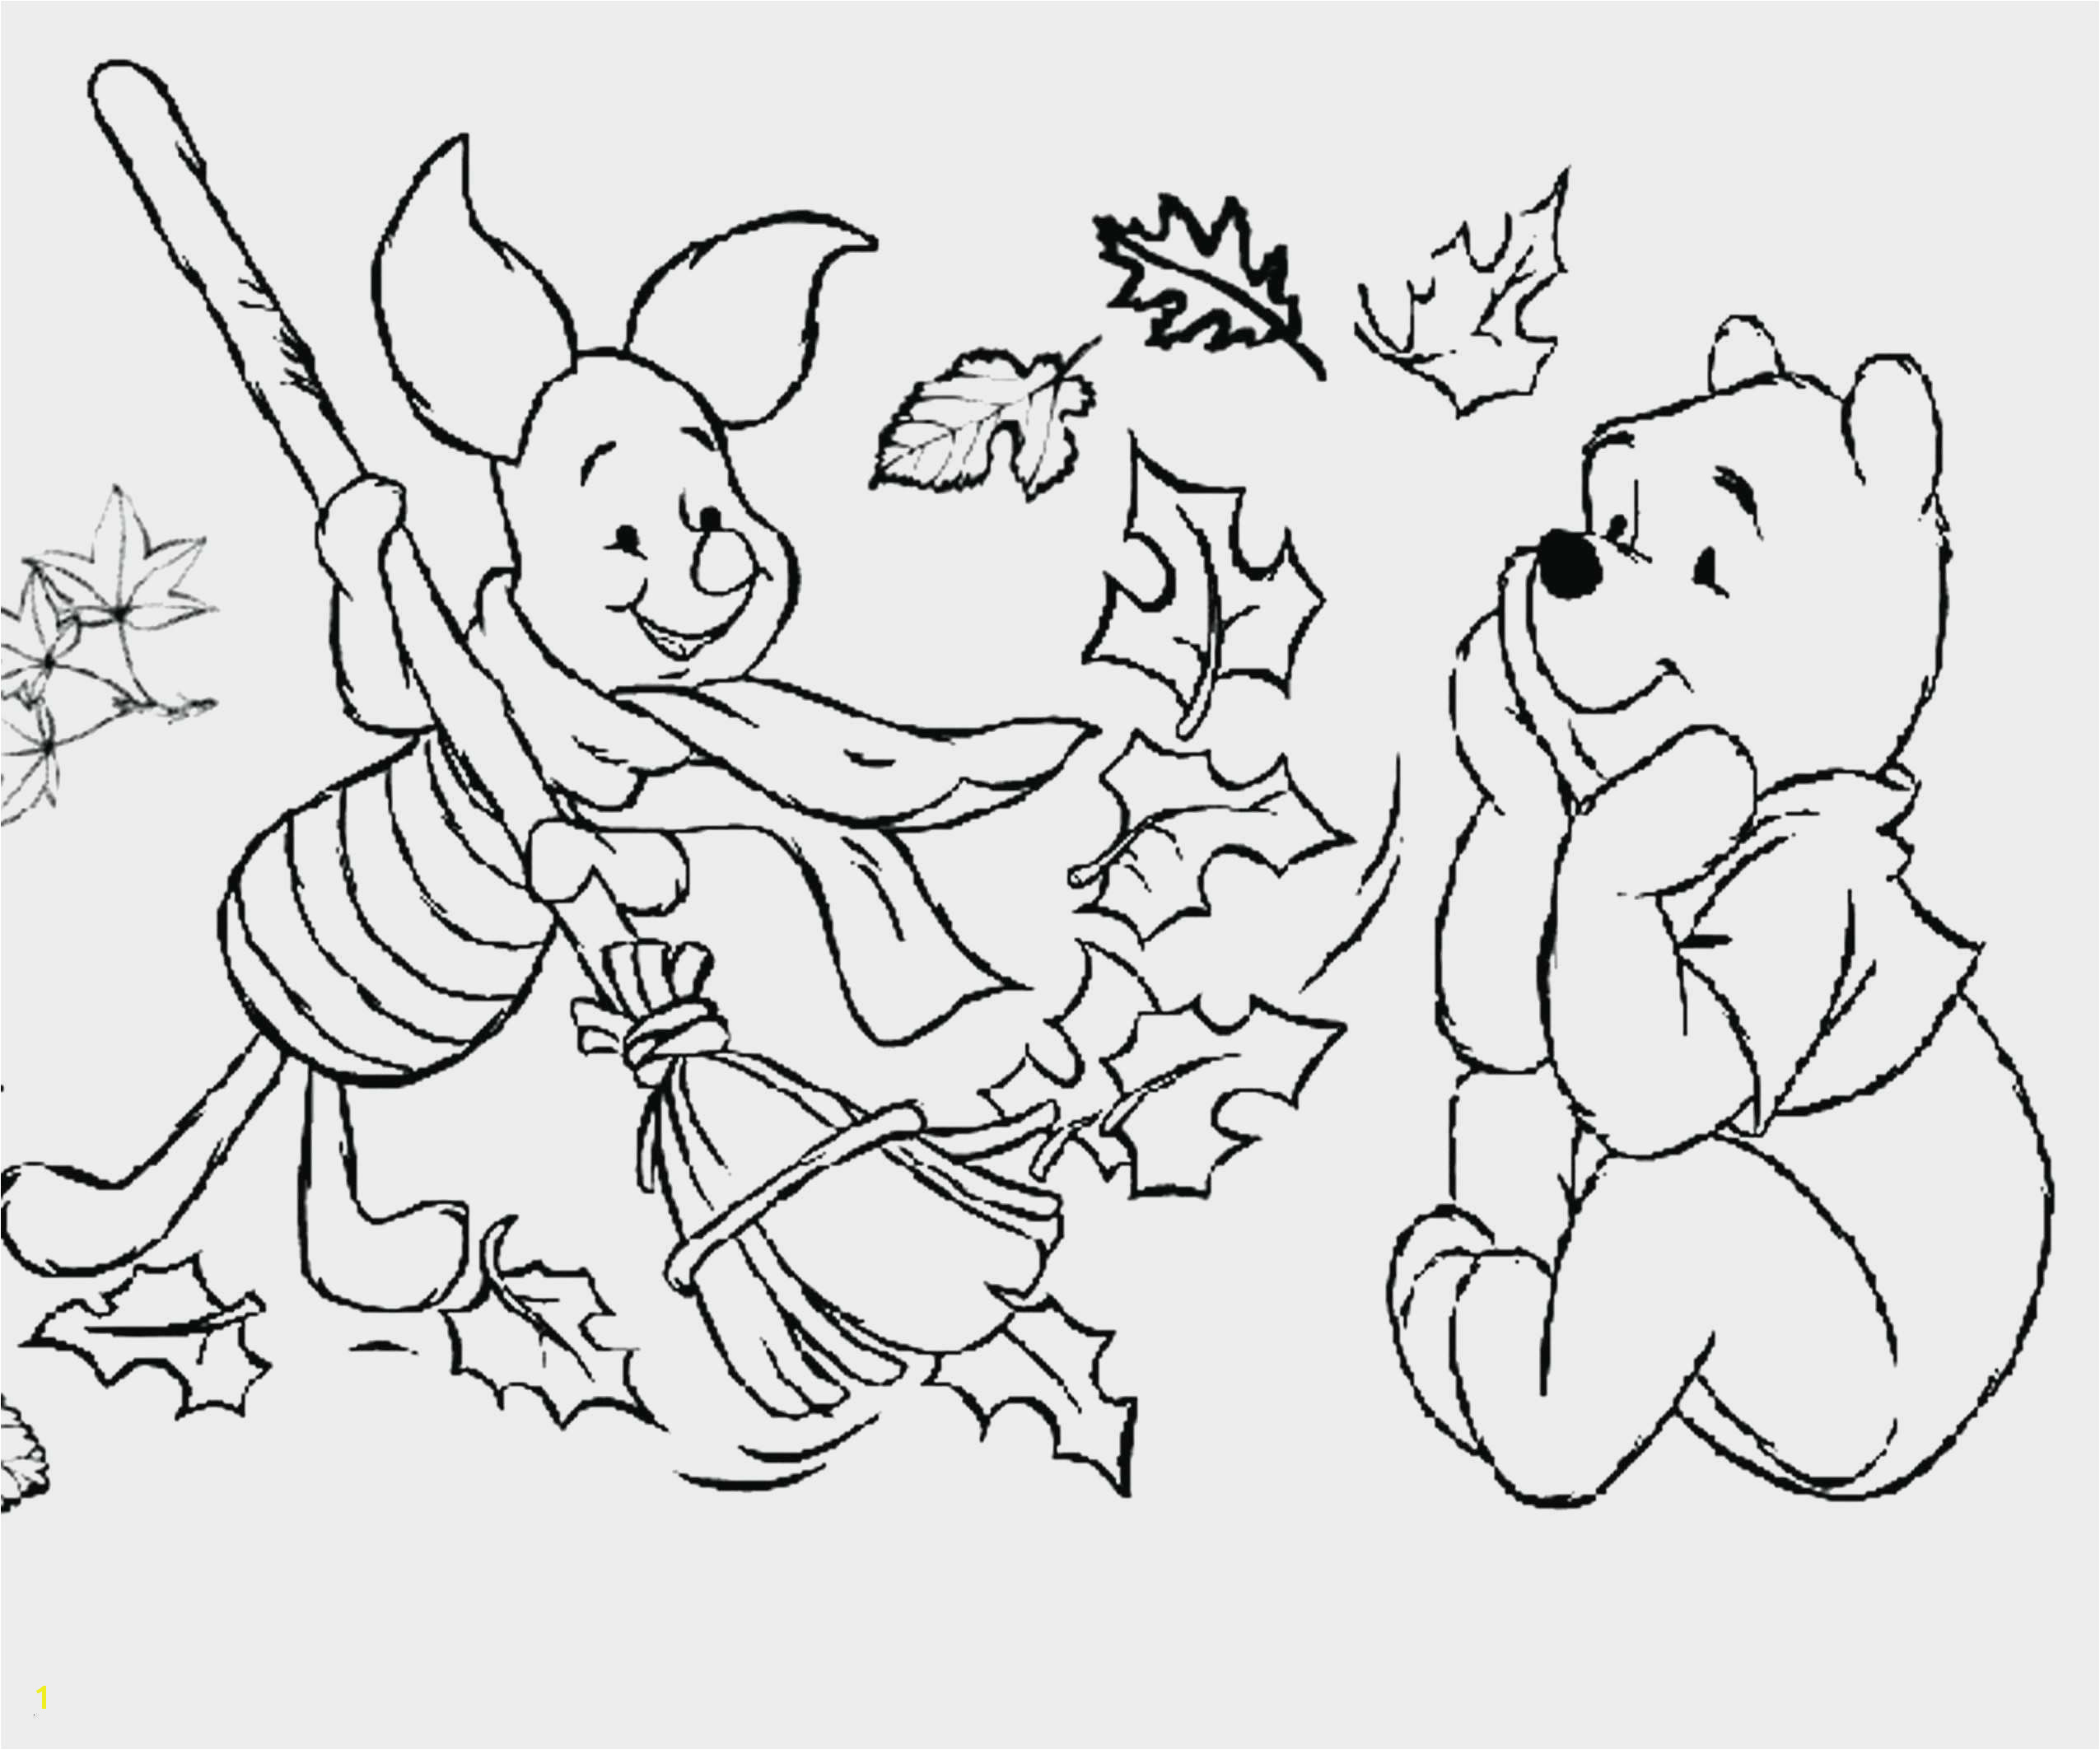 Puppy Halloween Coloring Pages Printable Free Printable Halloween Coloring Pages